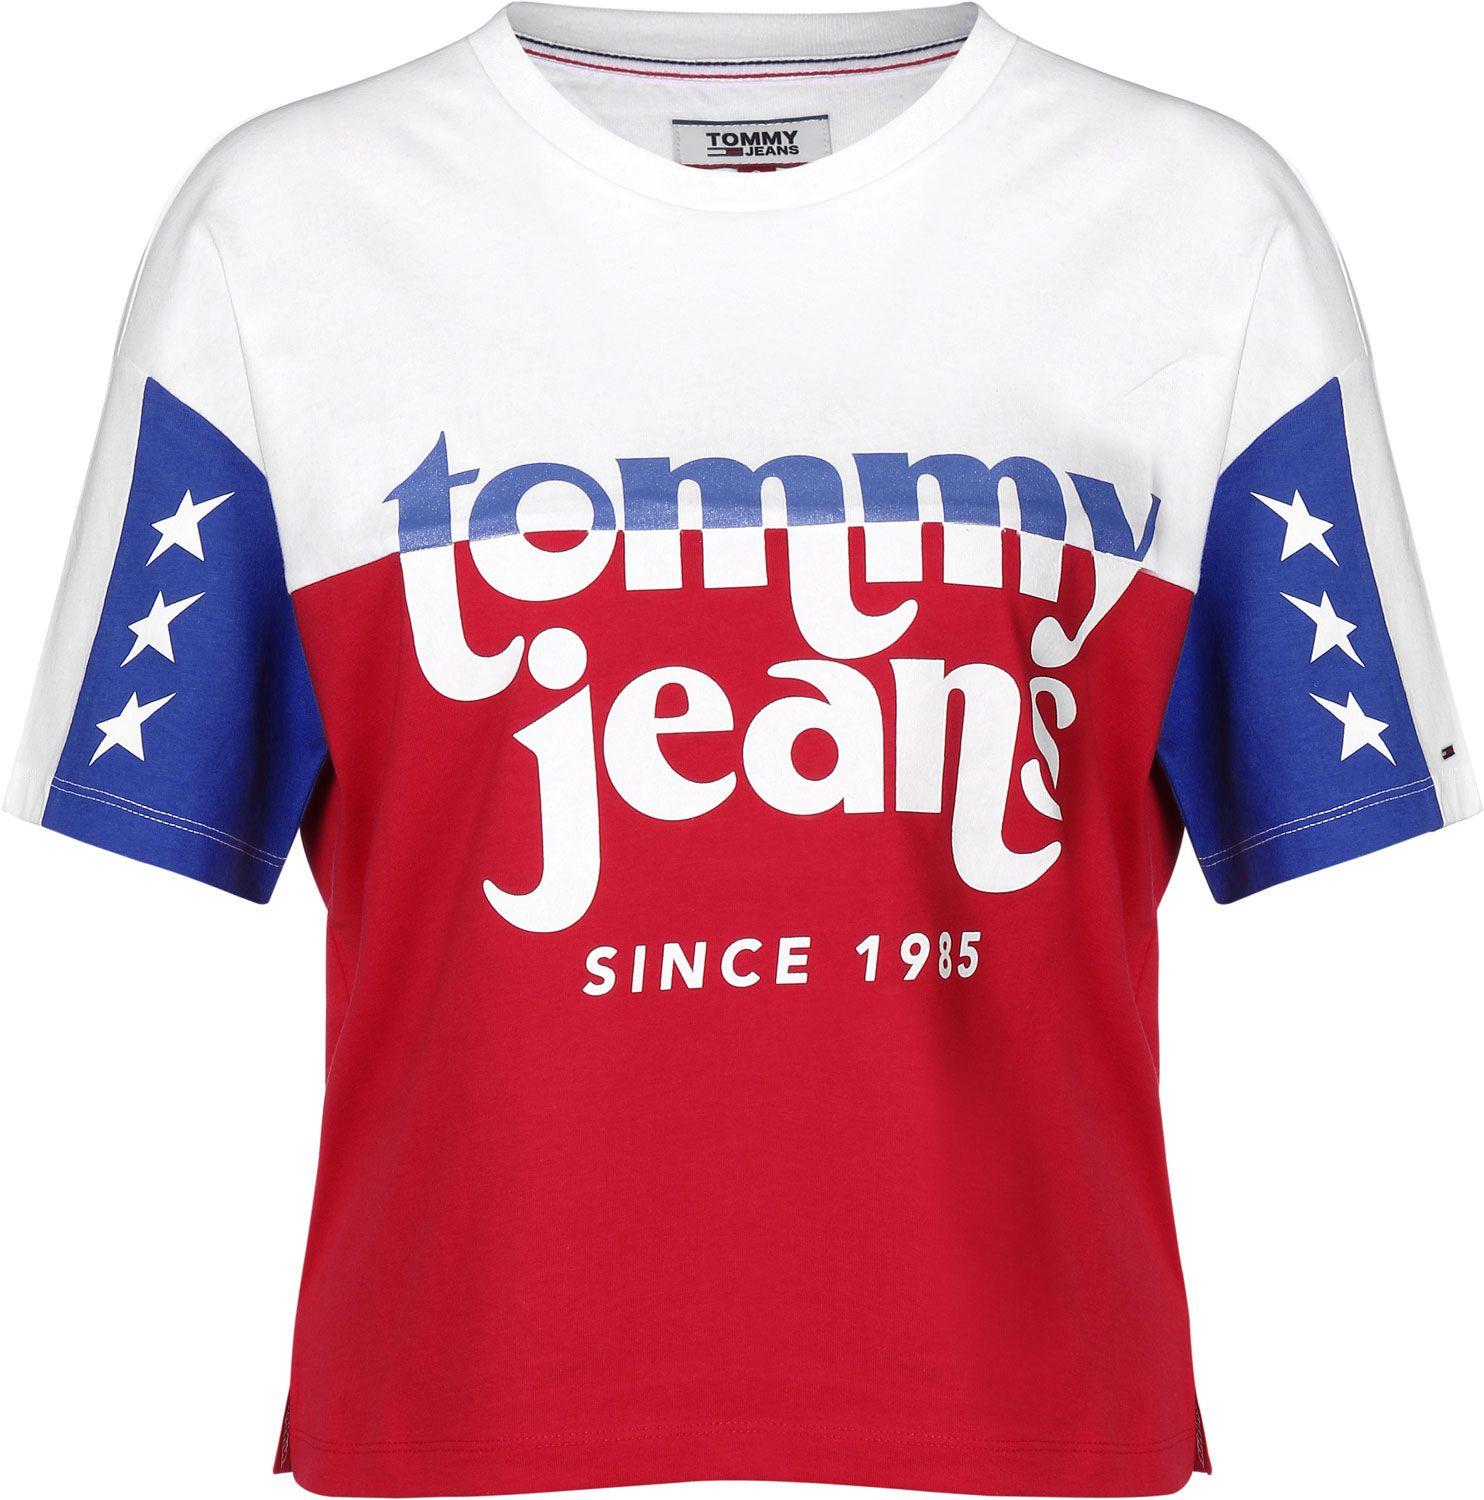 White Red Fashion Logo - Tommy Jeans Color Block Logo W T-shirt red white blue fashion JE56056